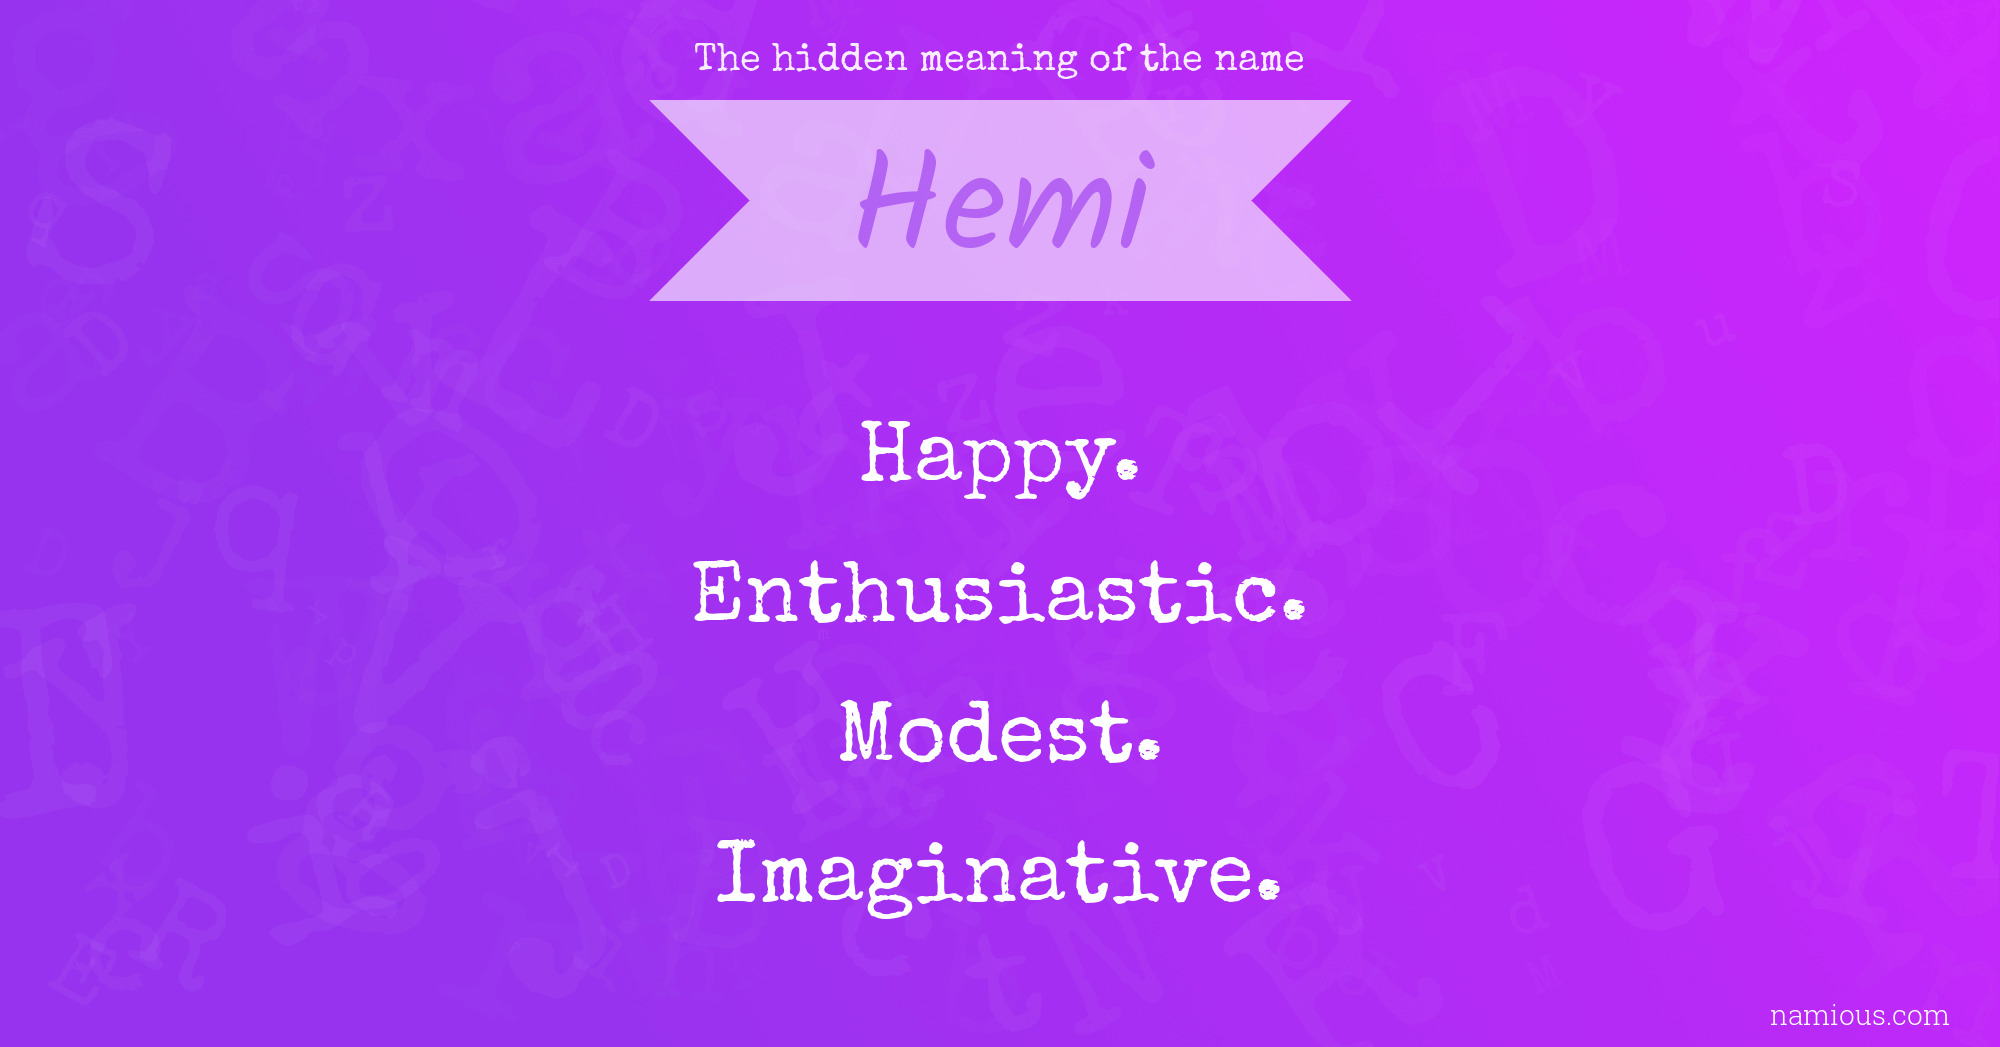 The hidden meaning of the name Hemi